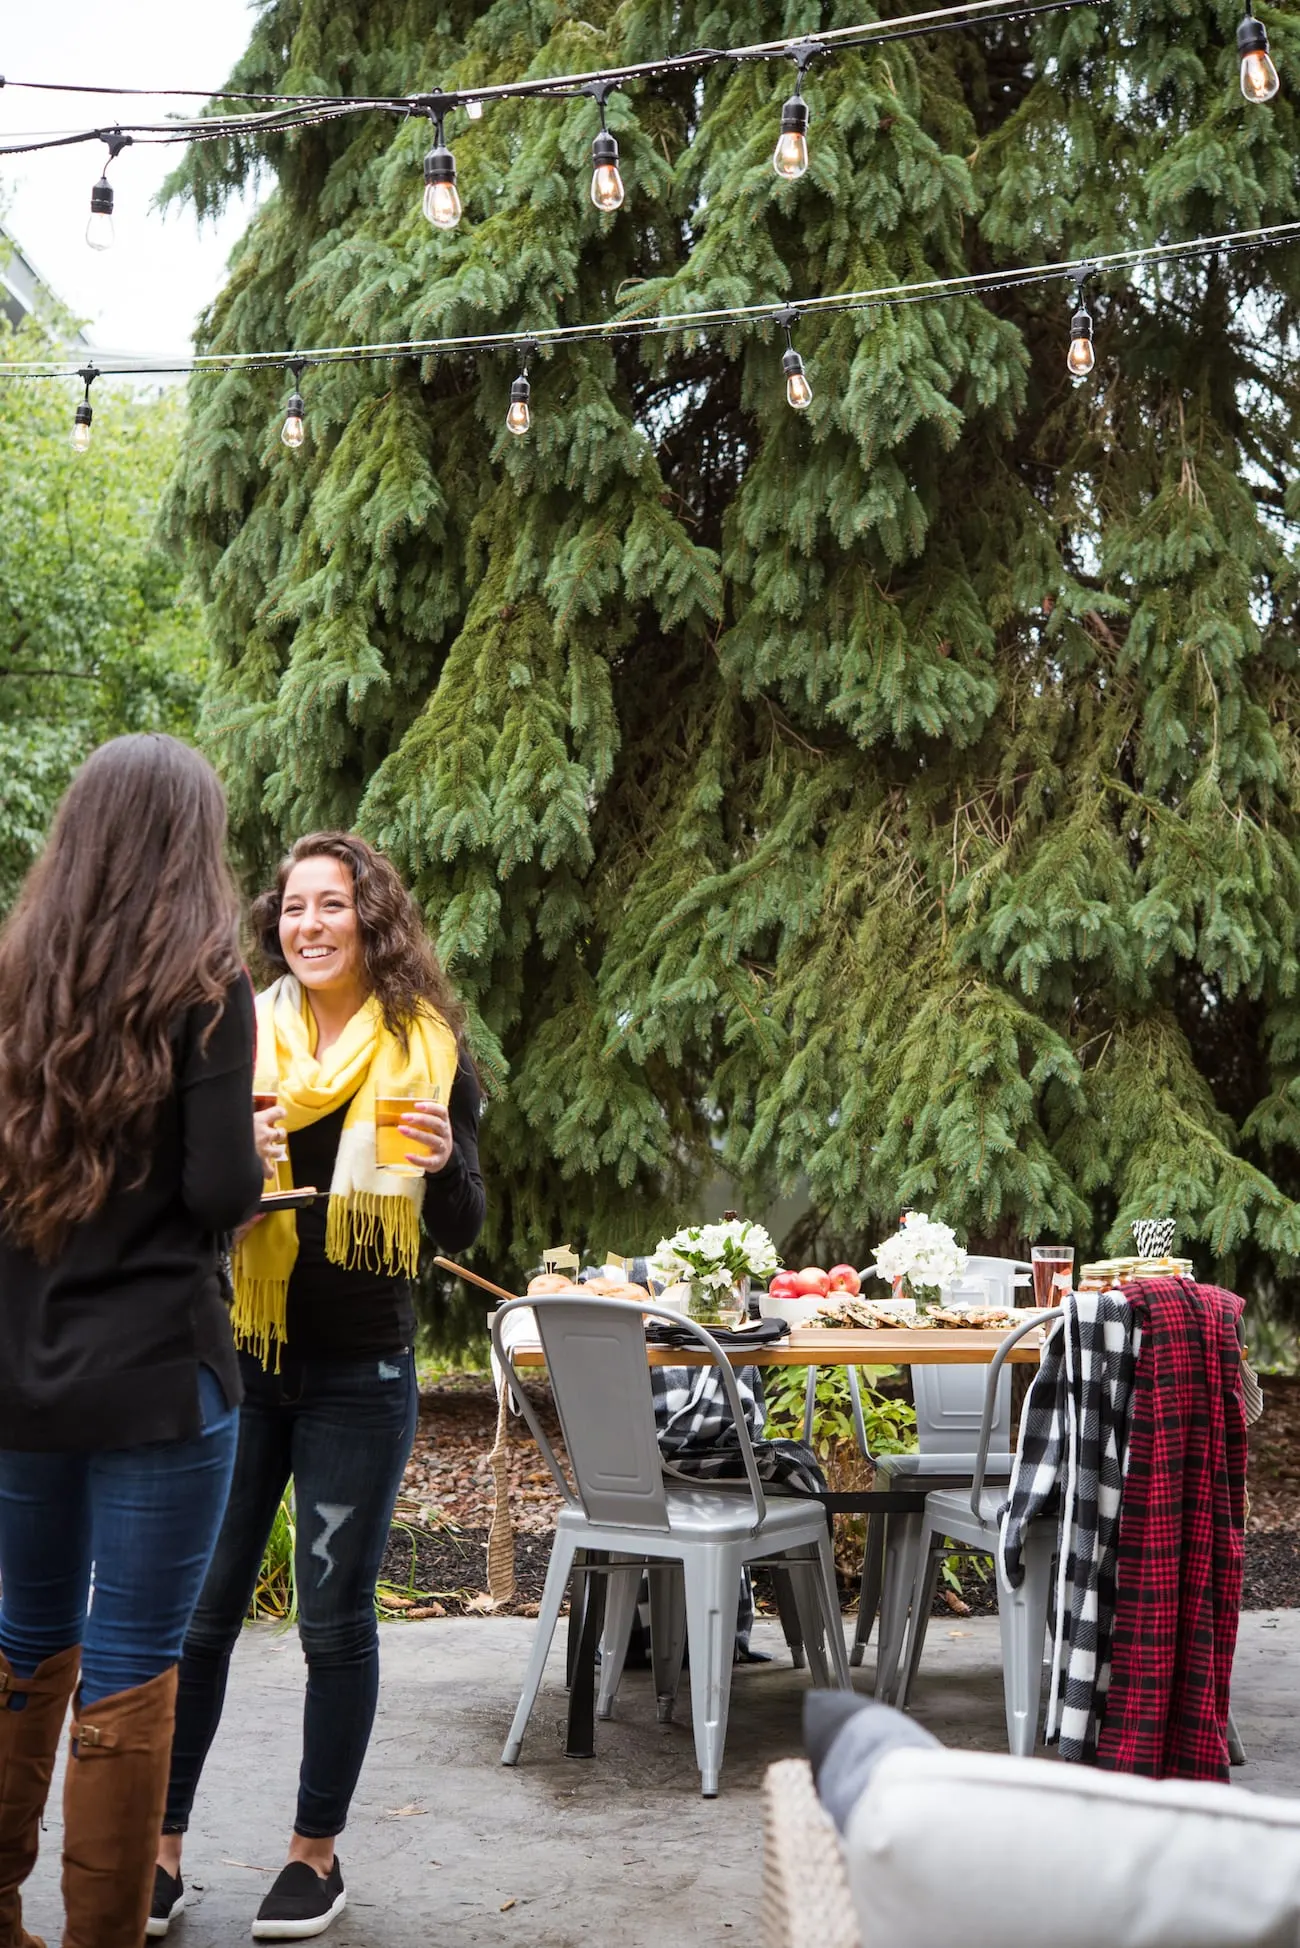 A Festive Fall Tailgate Party from Entertaining Blog @cydconverse